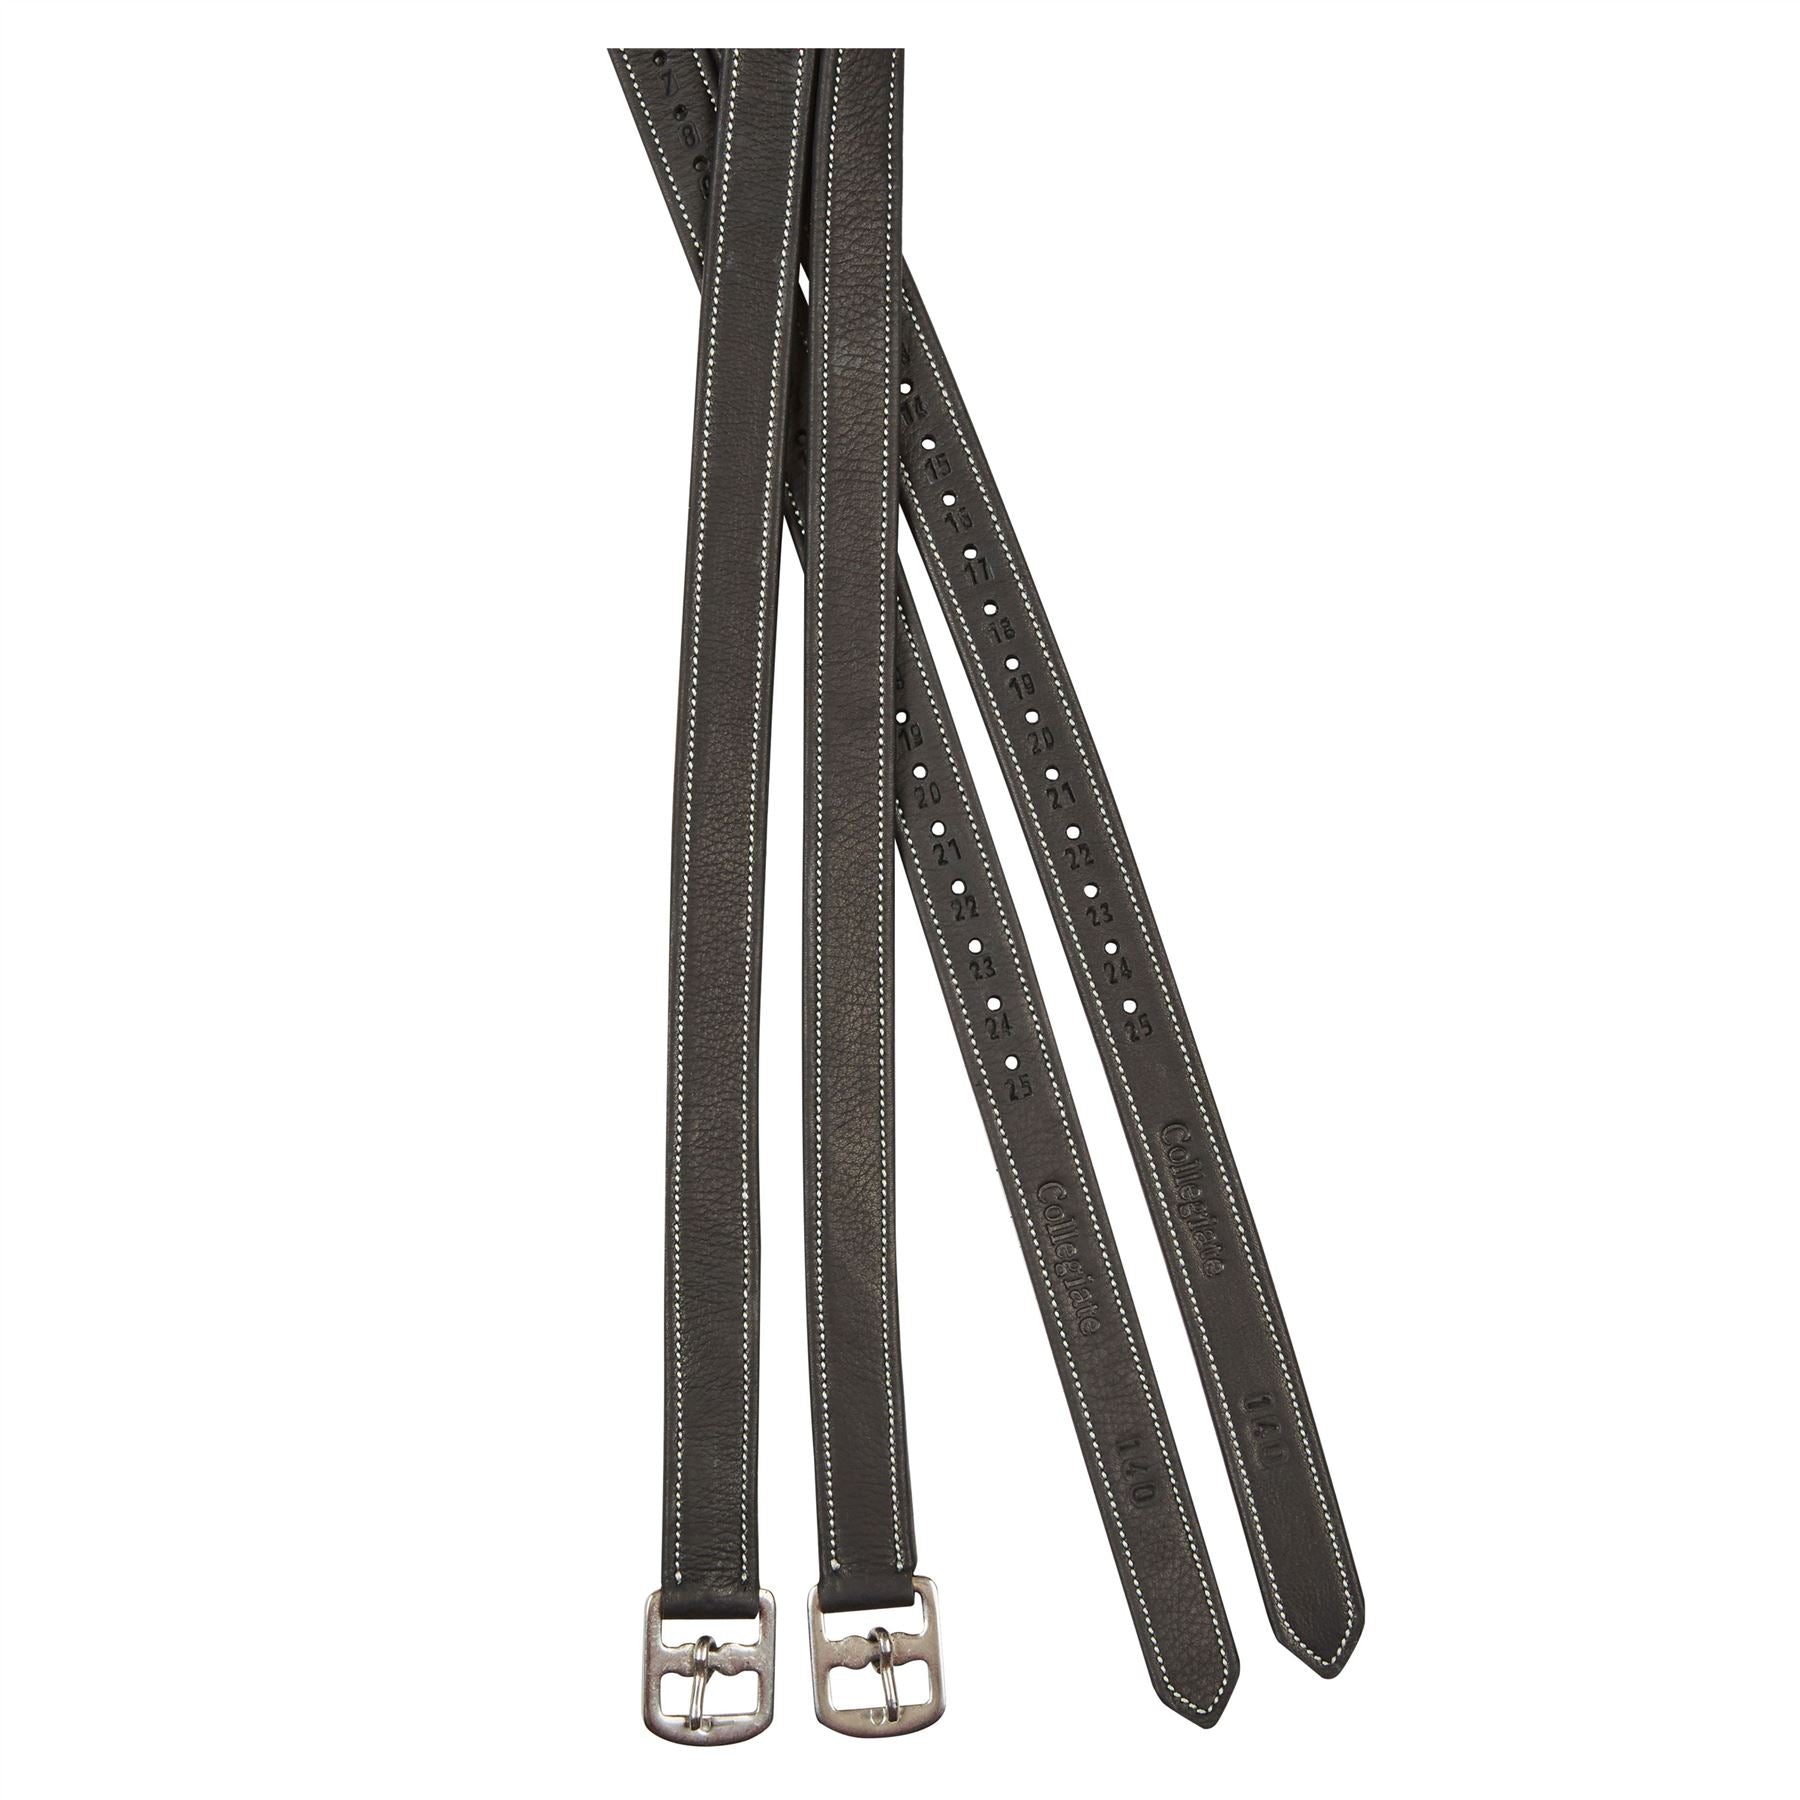 Collegiate Luxe Stirrup Leathers - Just Horse Riders